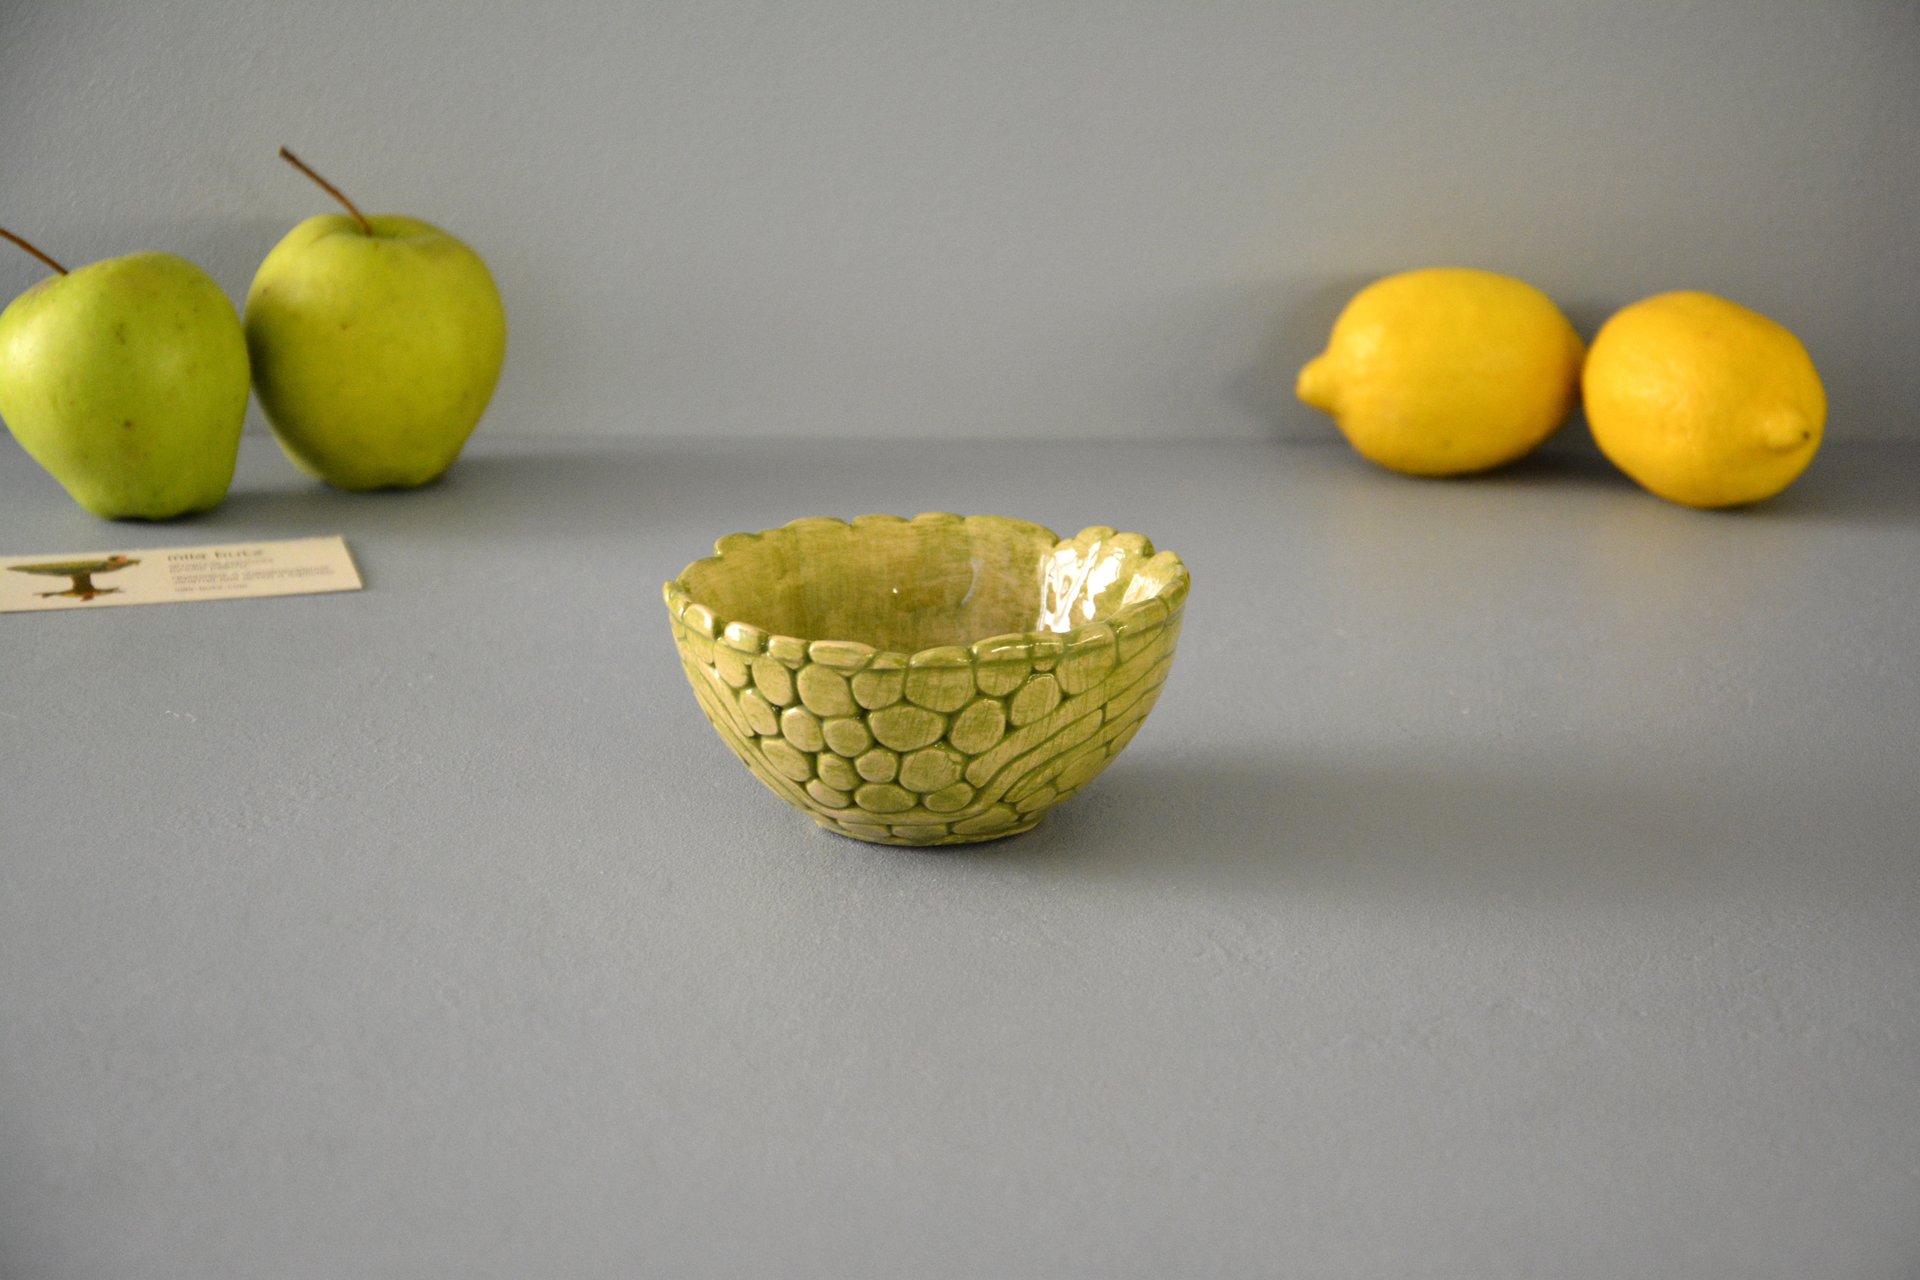 Light Green patina - Pialy and sauceboats, height - 6 cm, diameter - 11.5 cm, photo 1 of 4.